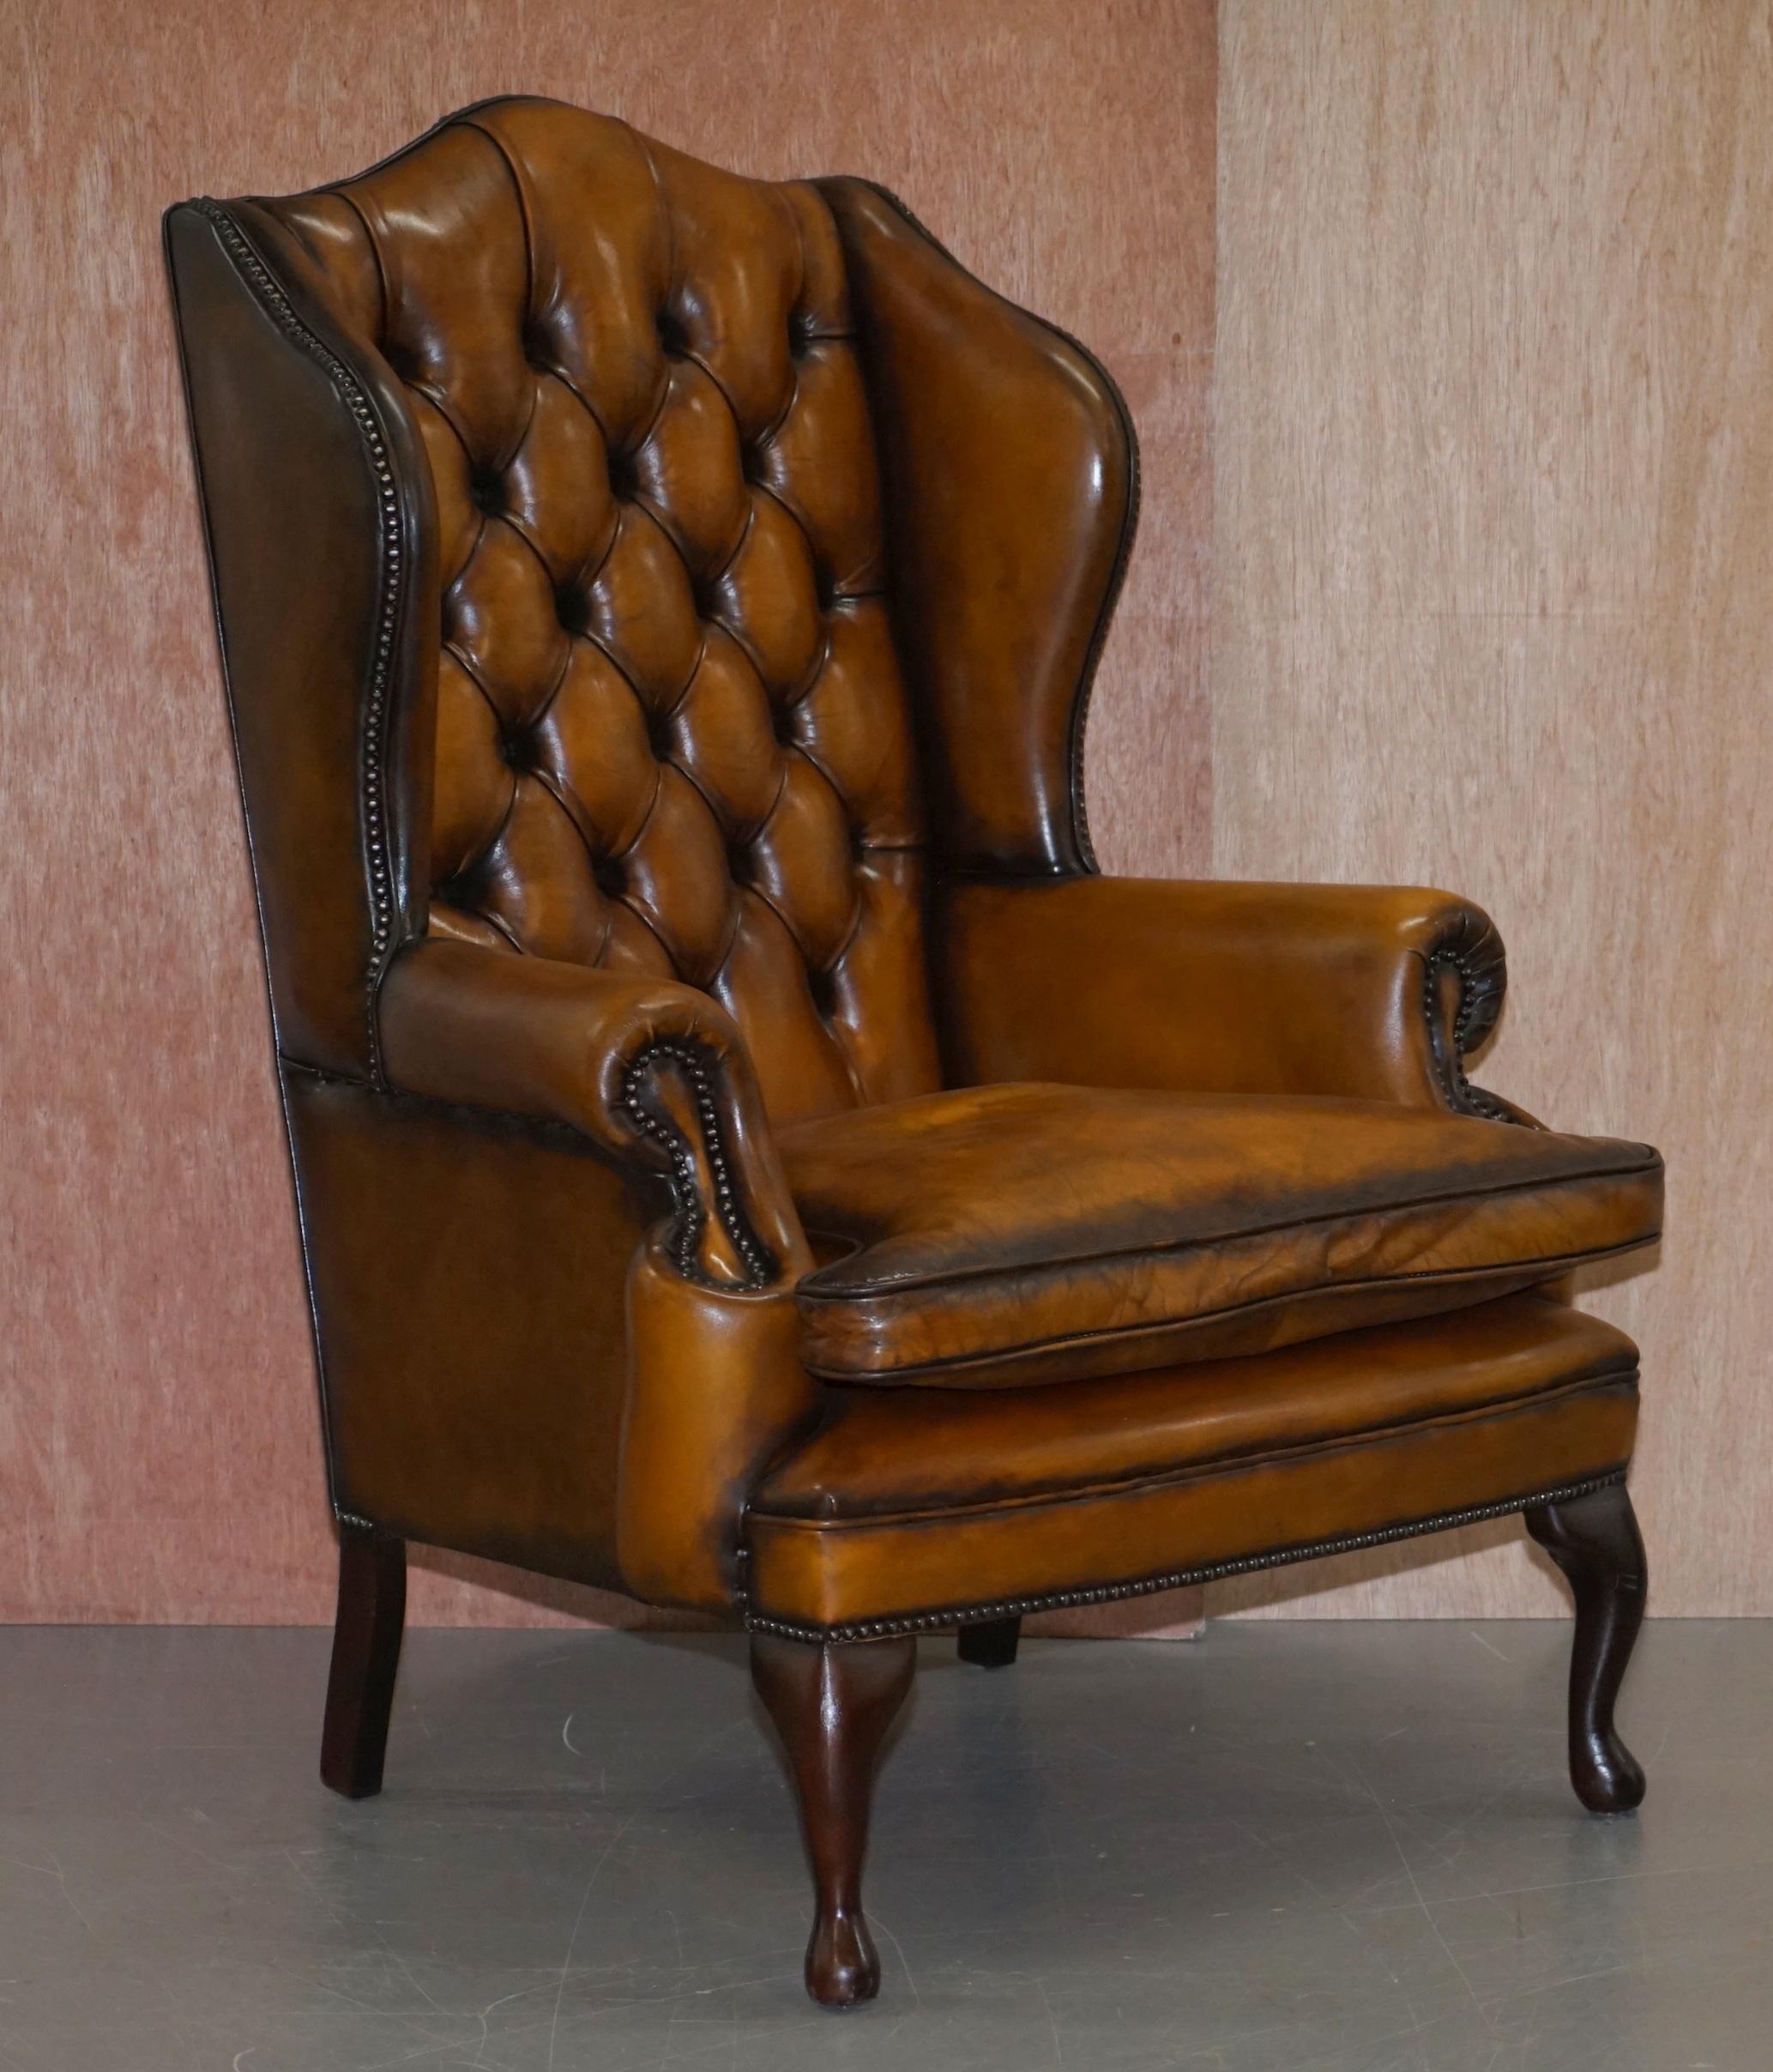 We are delighted to offer for sale this stunning William Morris style Chesterfield fully restored vintage wingback armchair and footstool in Whisky brown leather with thick heavy feather filled cushion and coil sprung base 

A good looking and